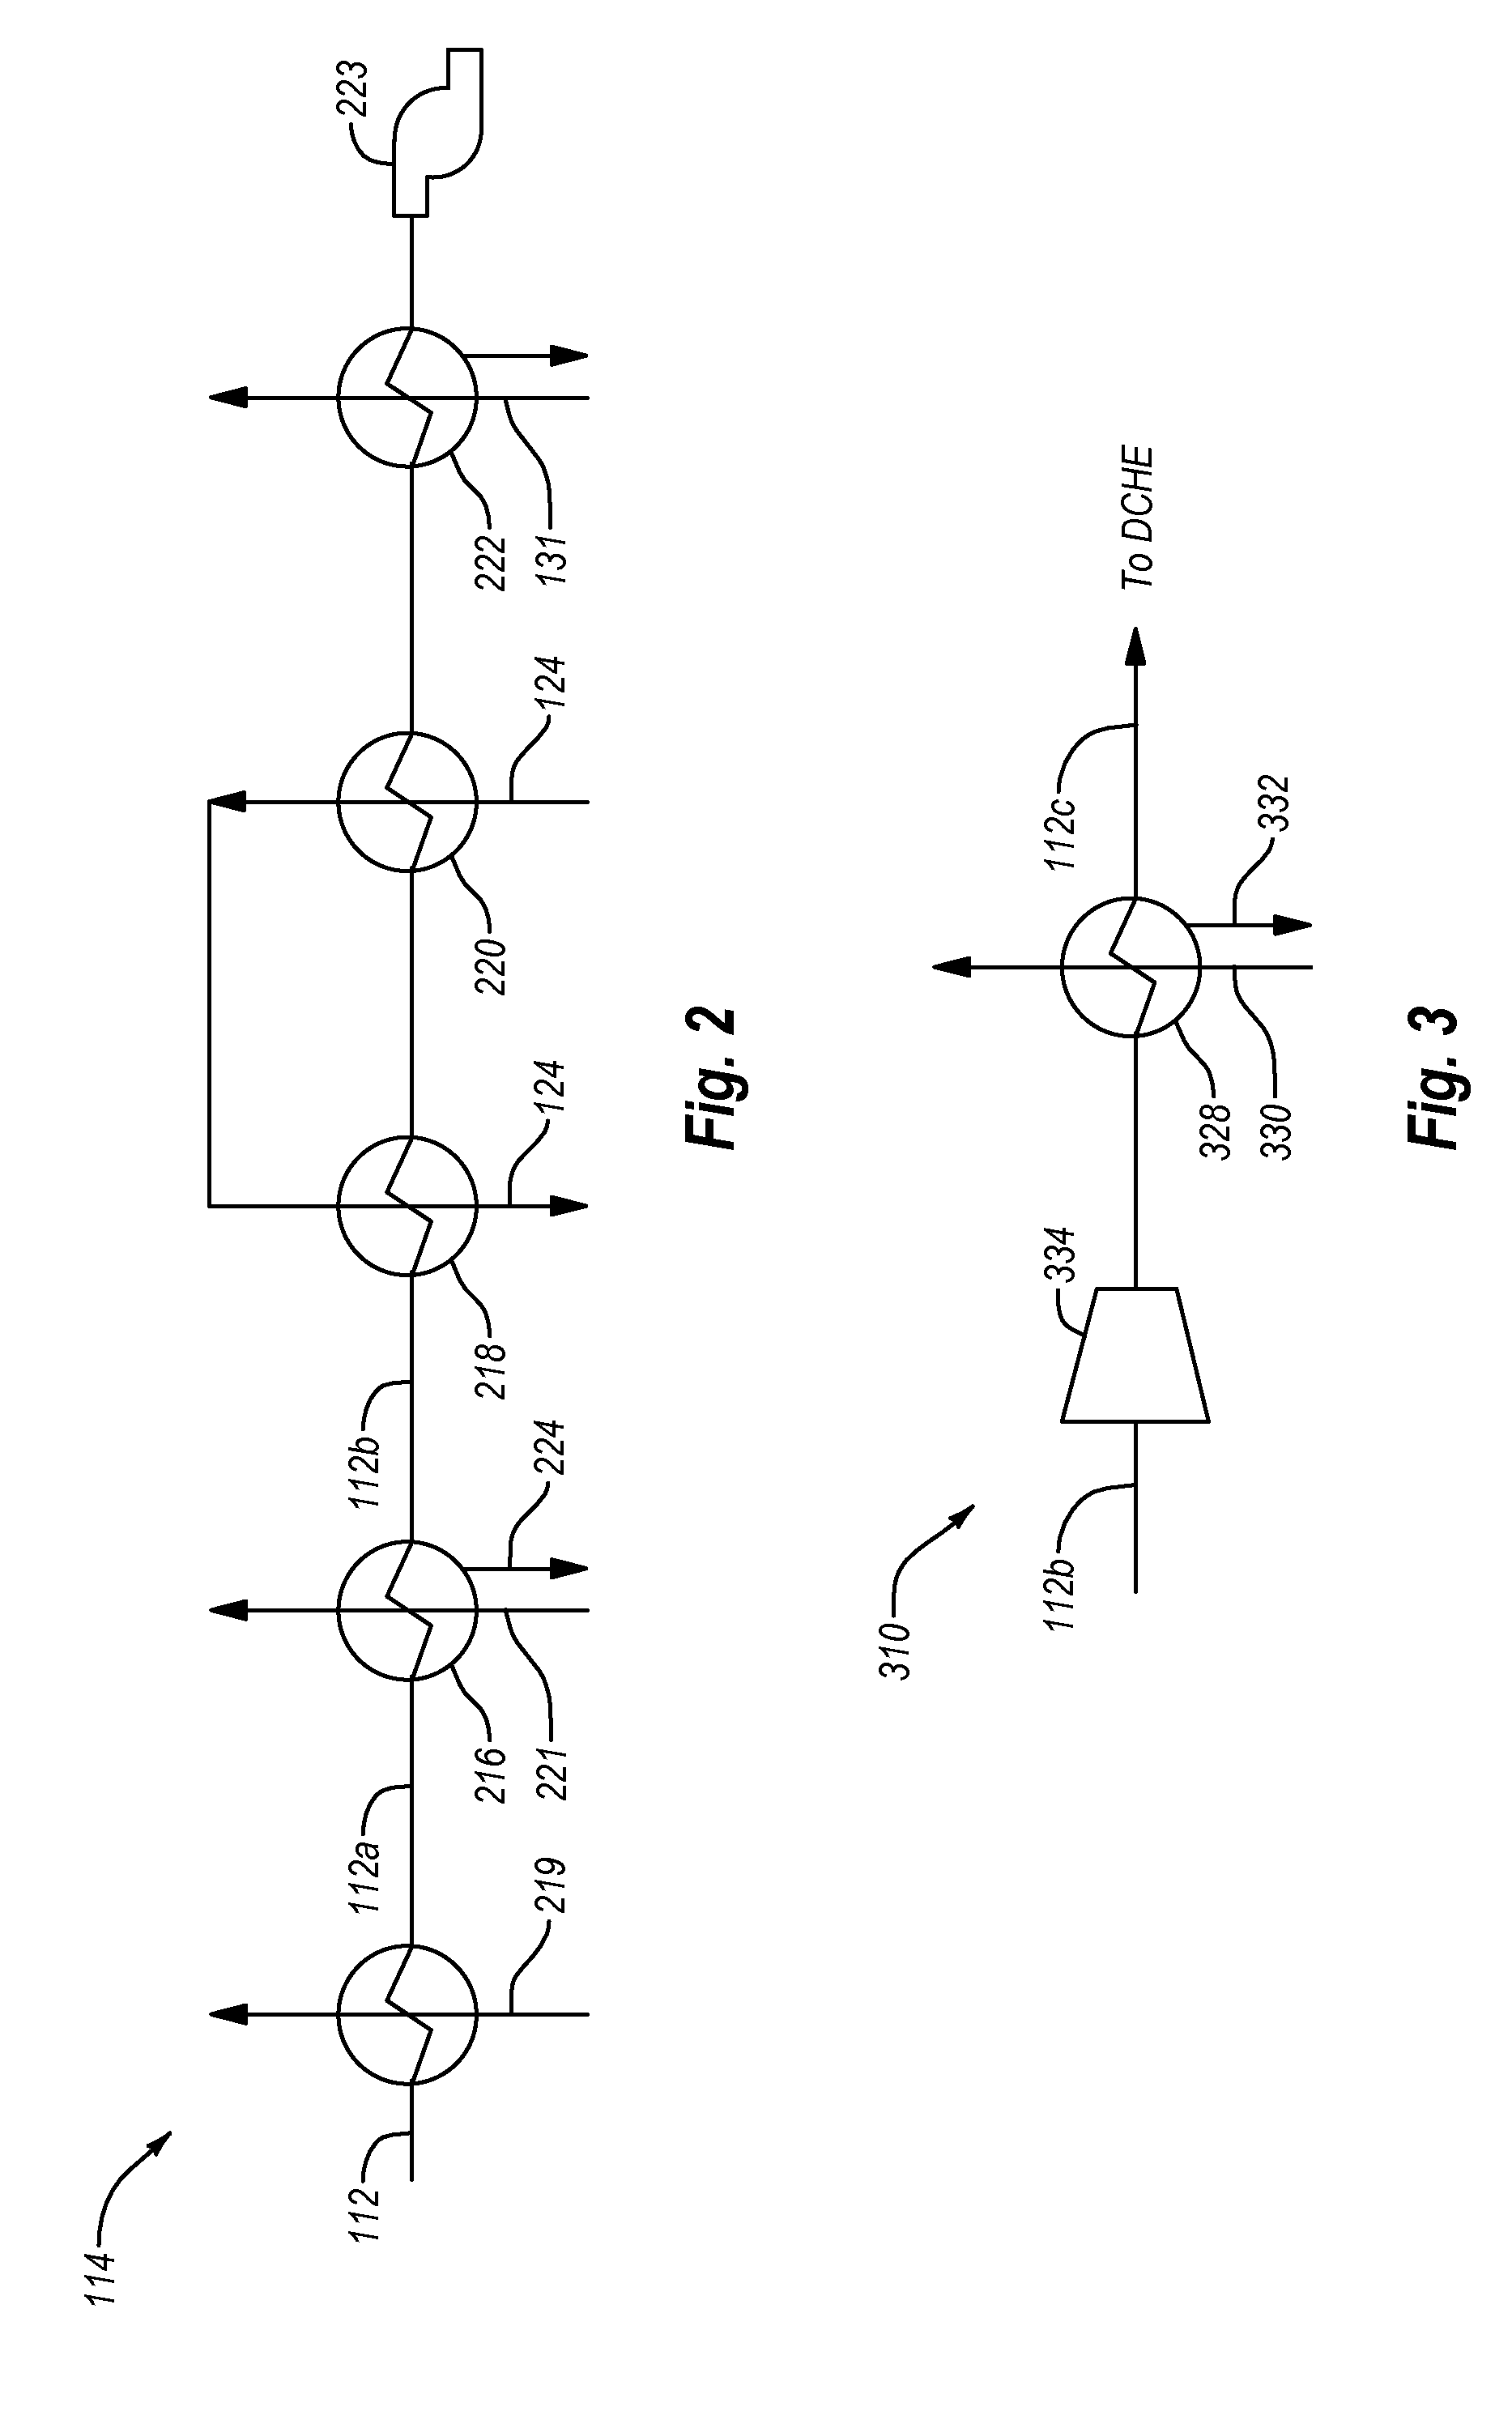 Systems and methods for separating condensable vapors from gases by direct-contact heat exchange